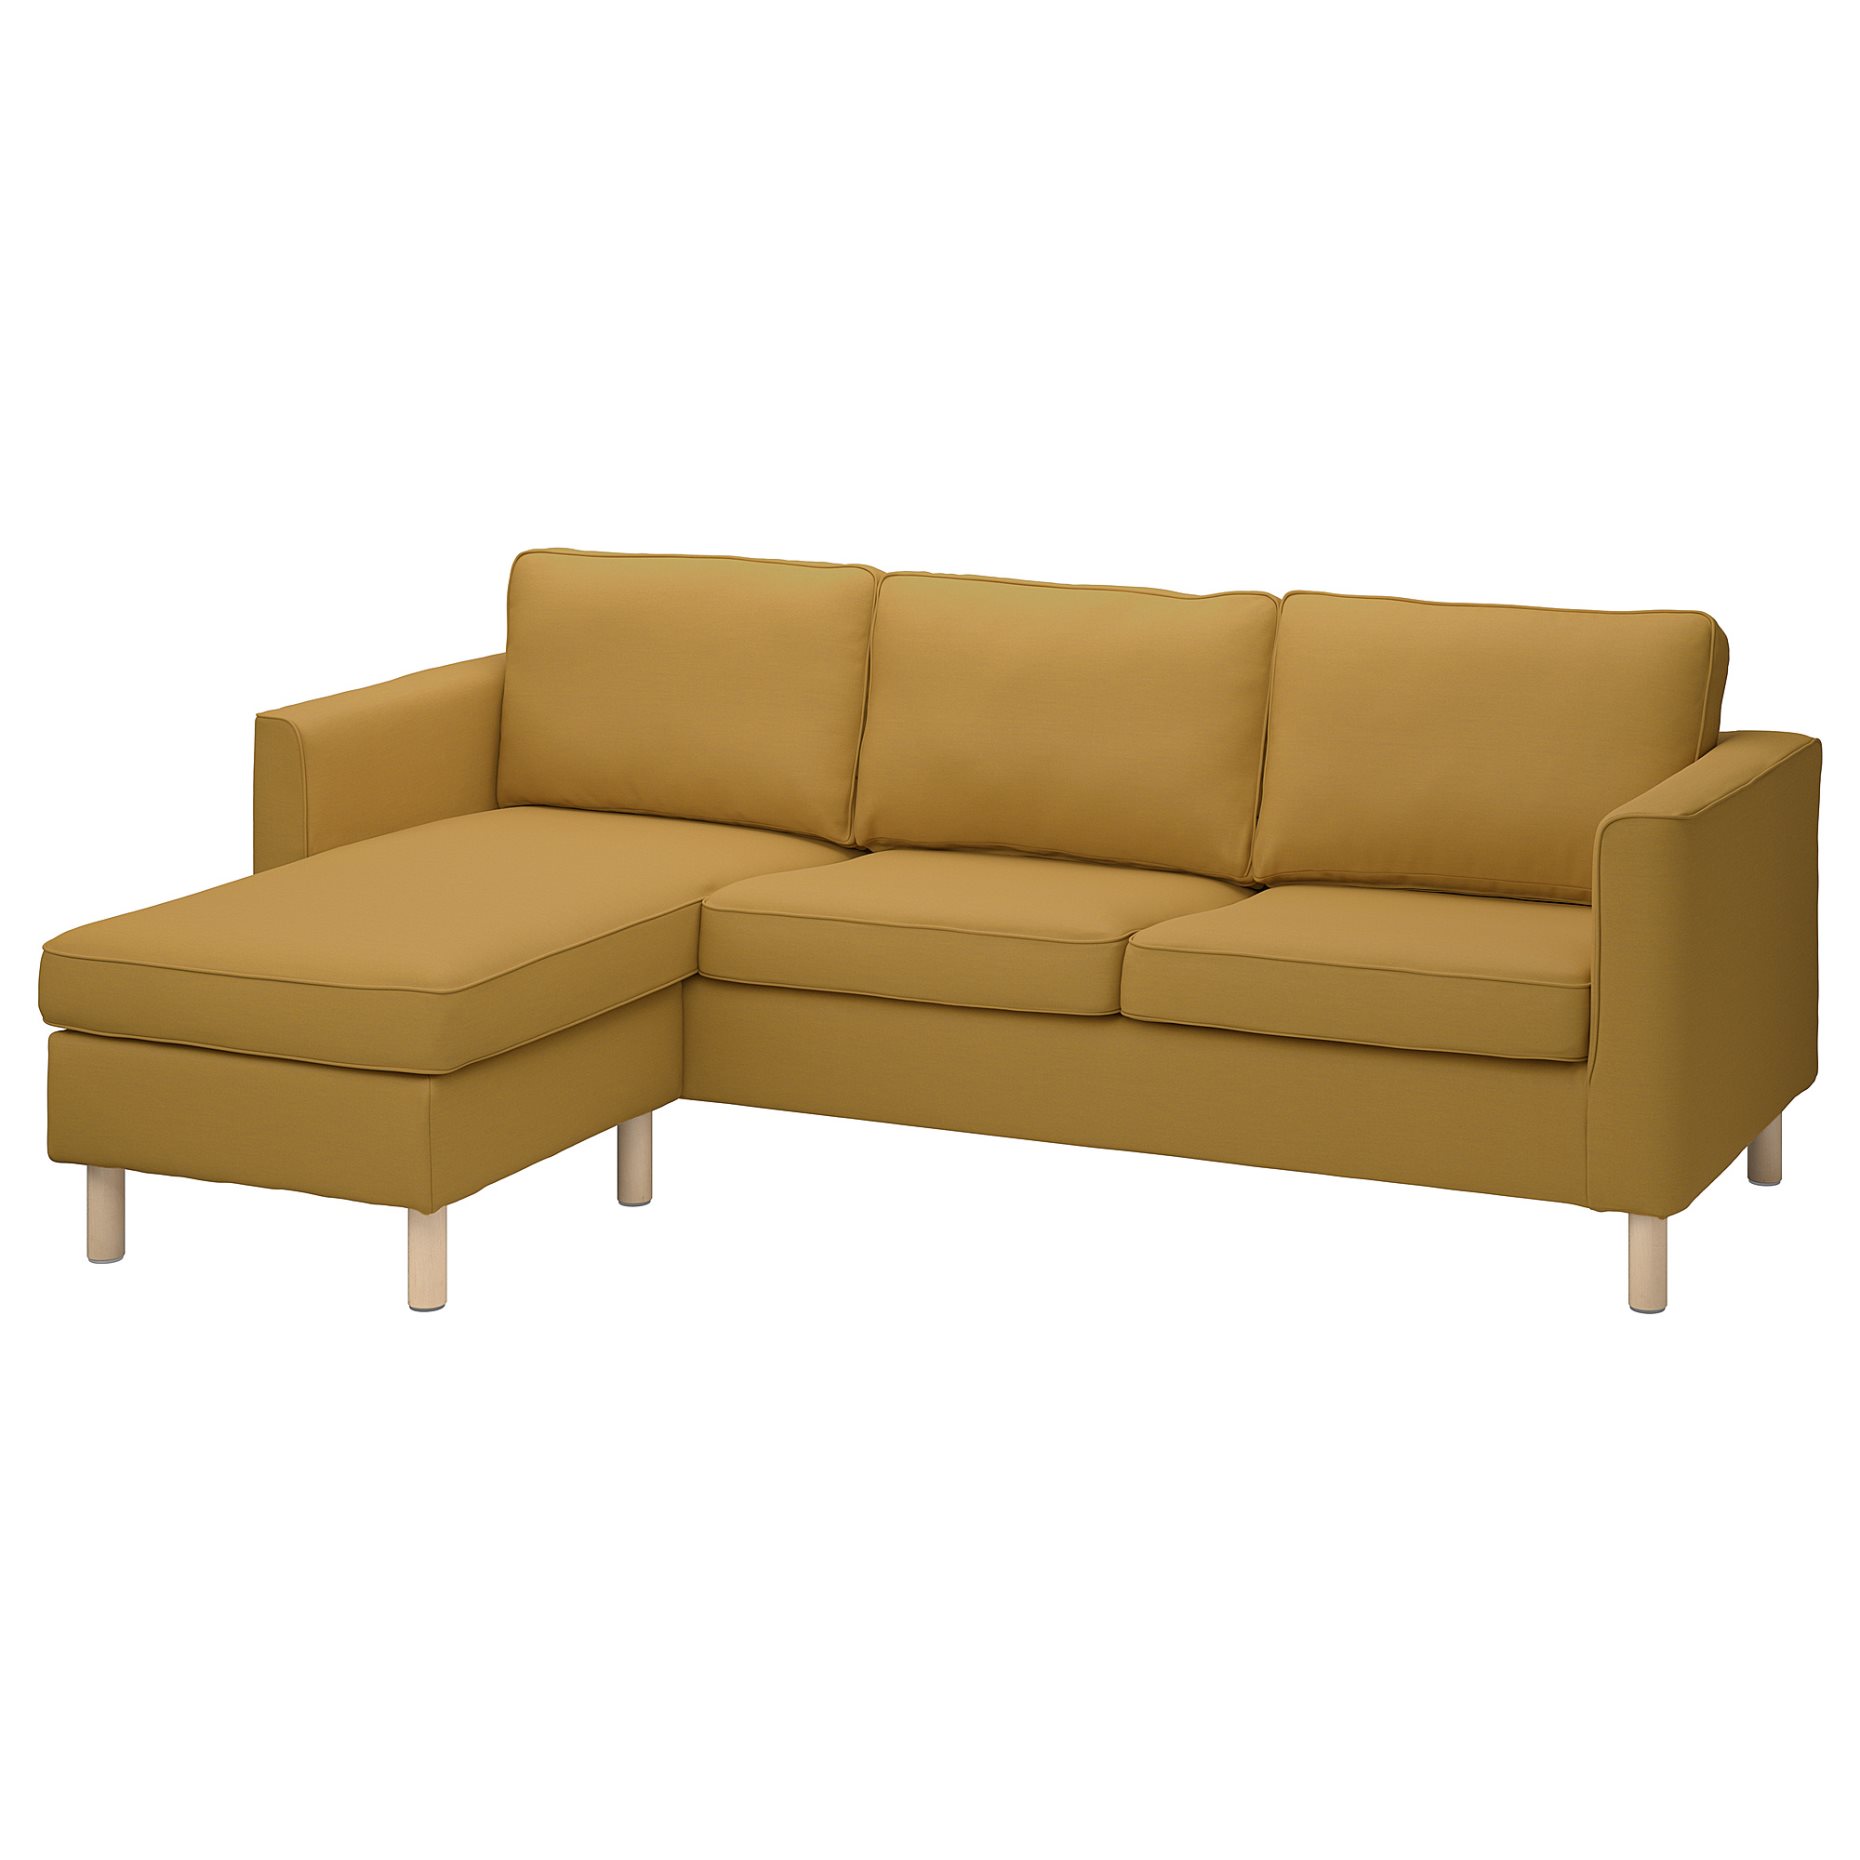 PÄRUP, cover for 3-seat sofa with chaise longue, 205.672.52